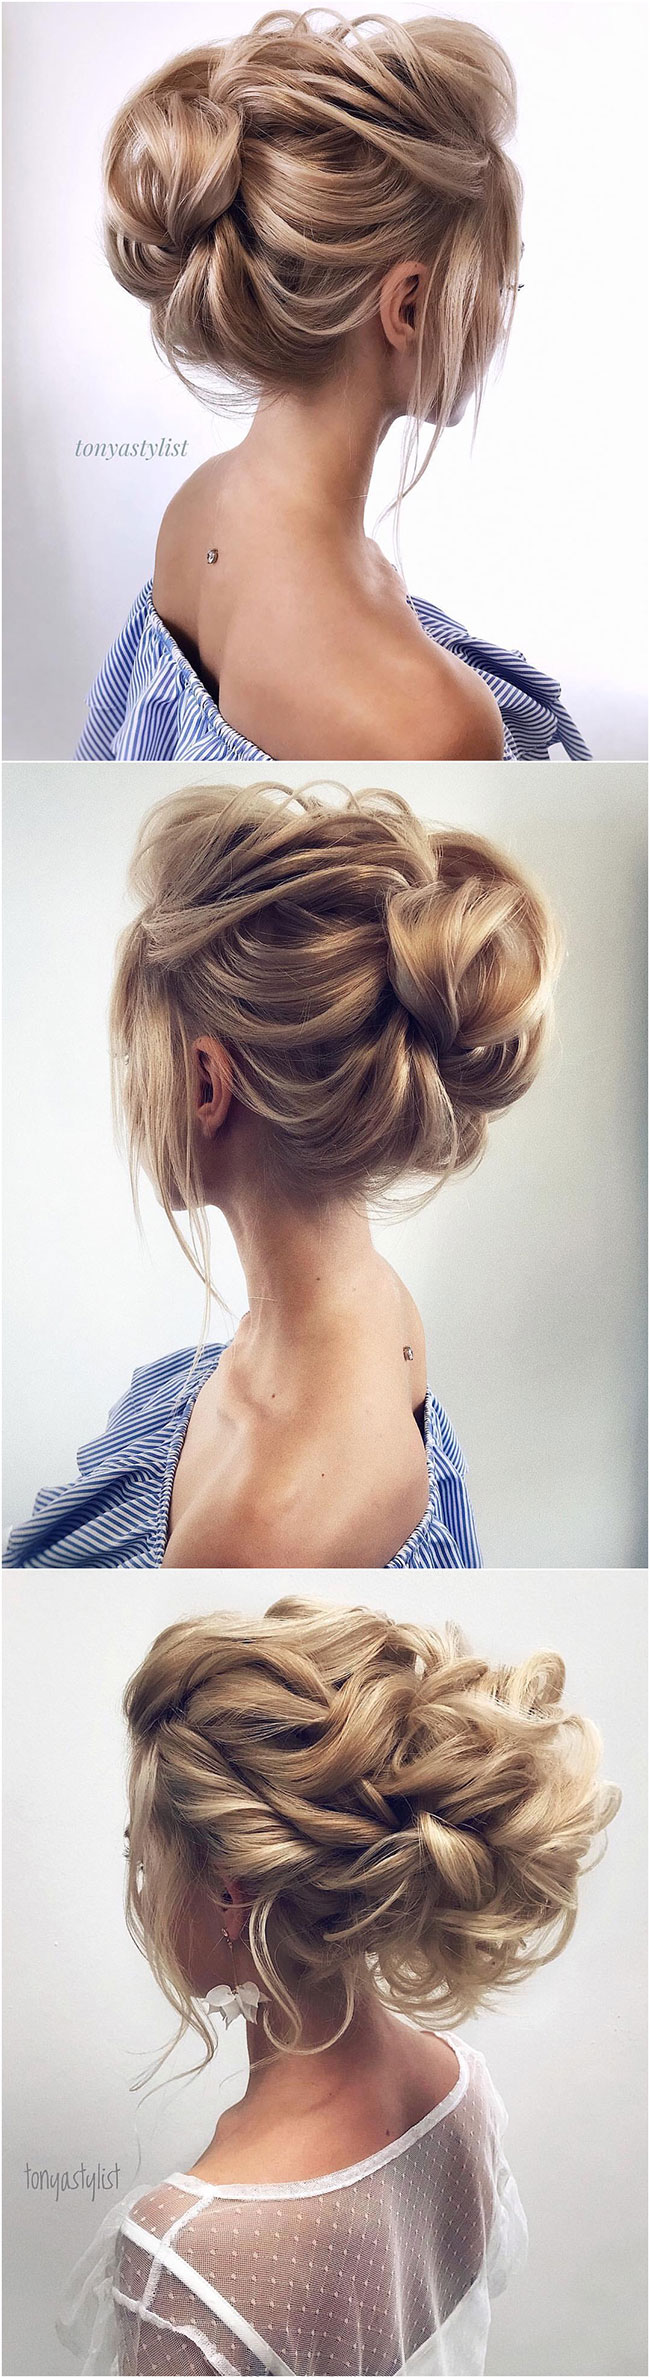 33 Country Wedding Hairstyles to Screenshot Immediately